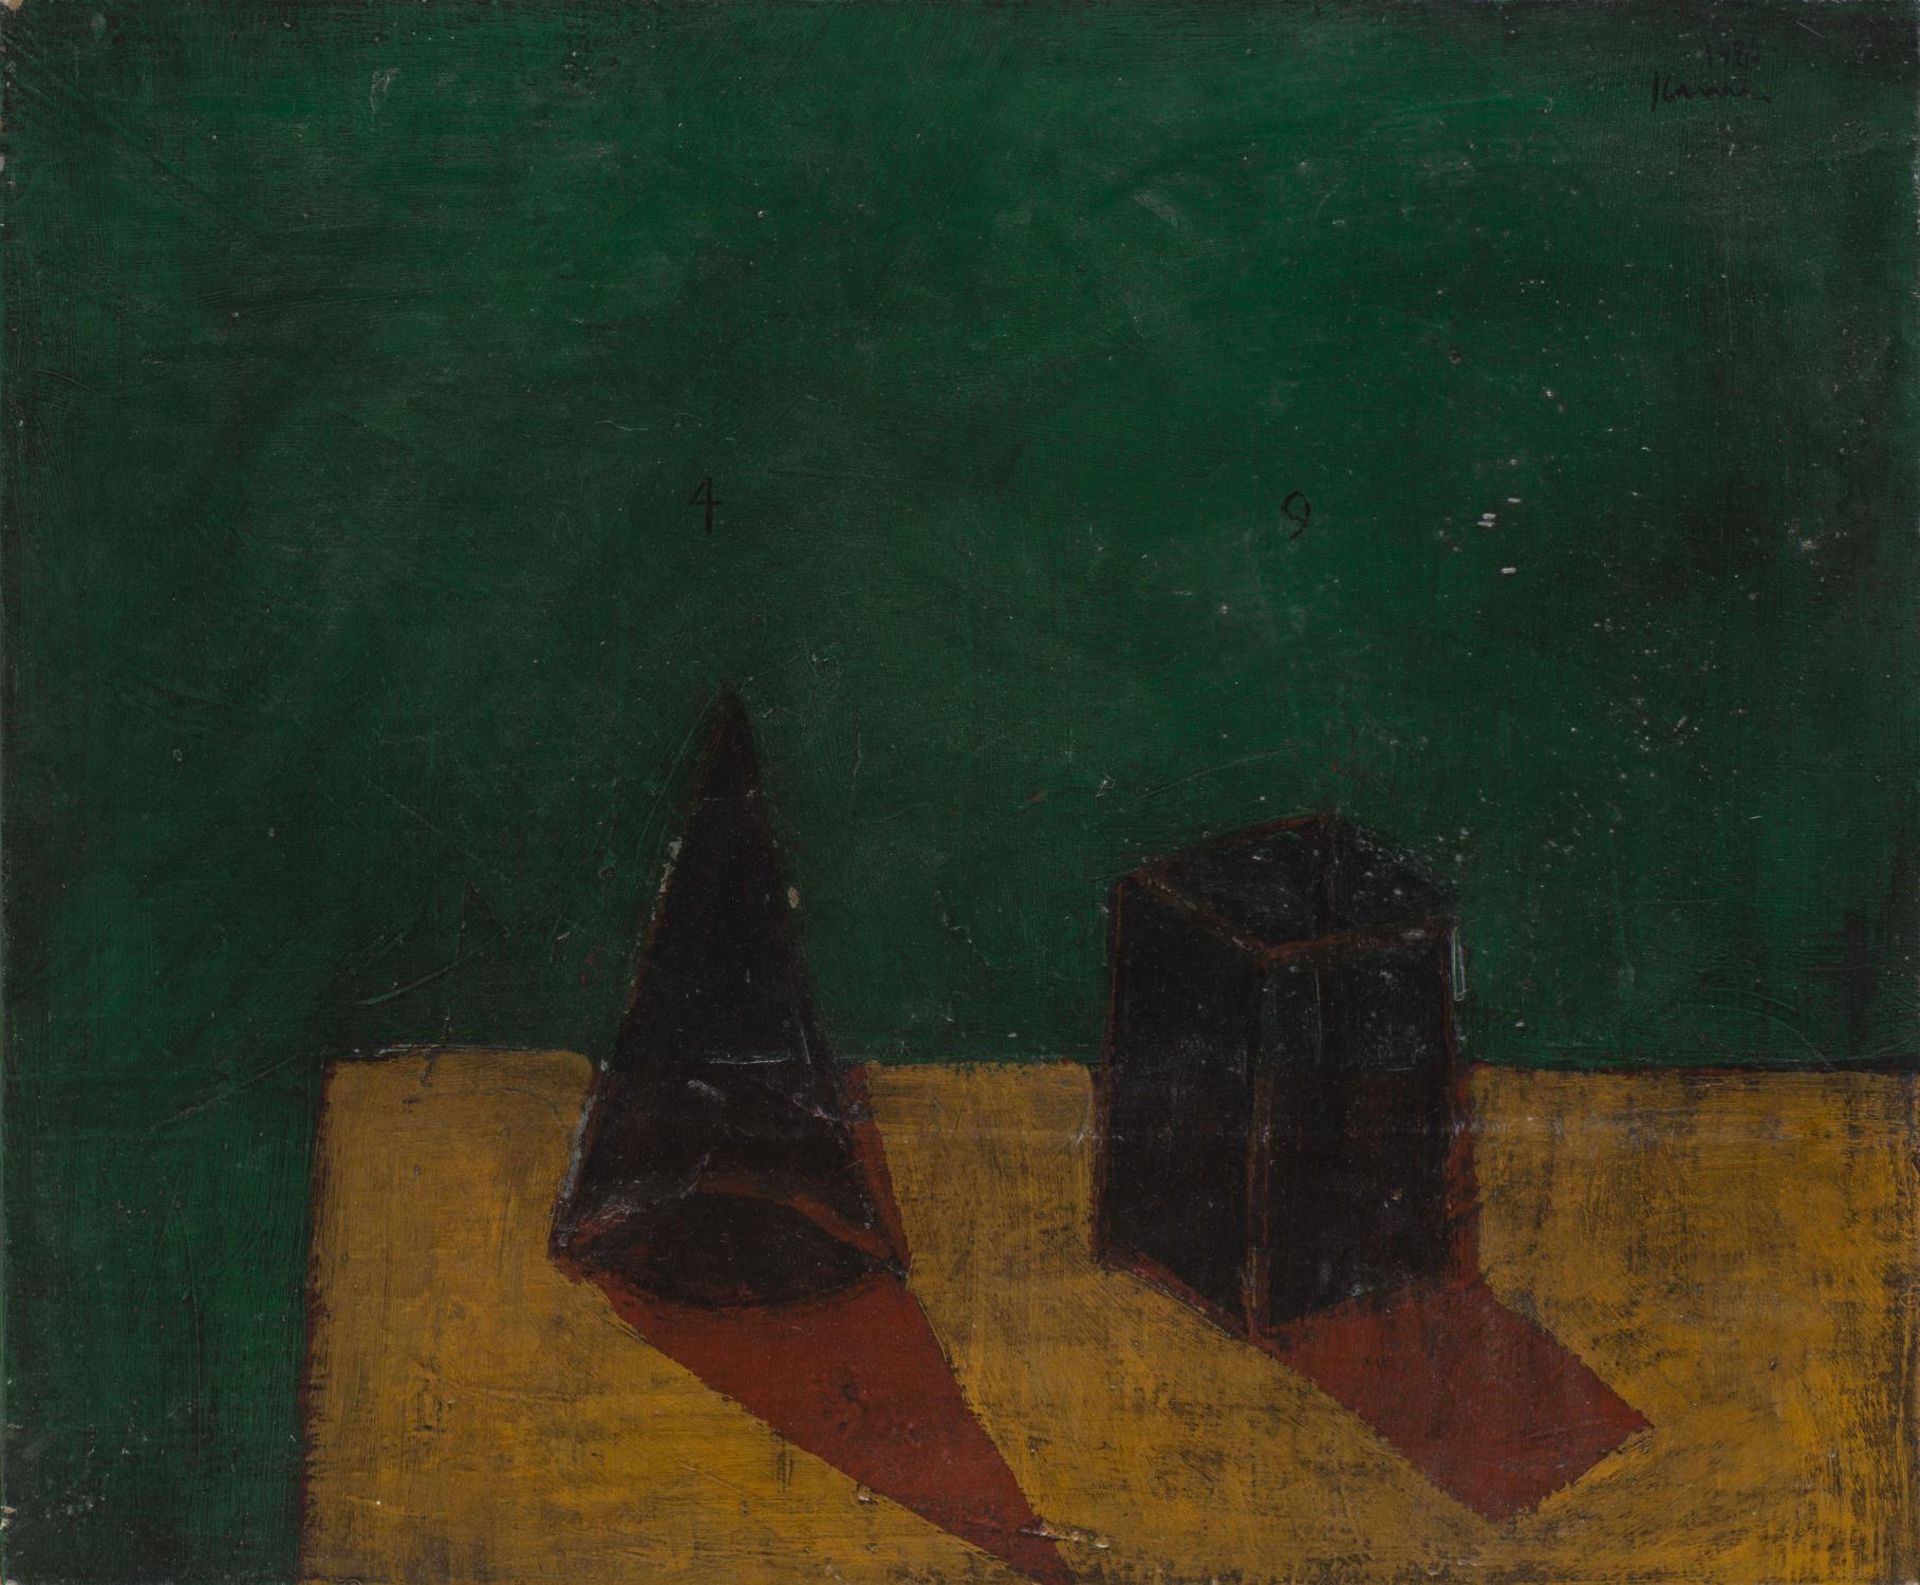 Charles KURRE (né en 1953), "Still life with objects n°4 & 9" - Image 4 of 14